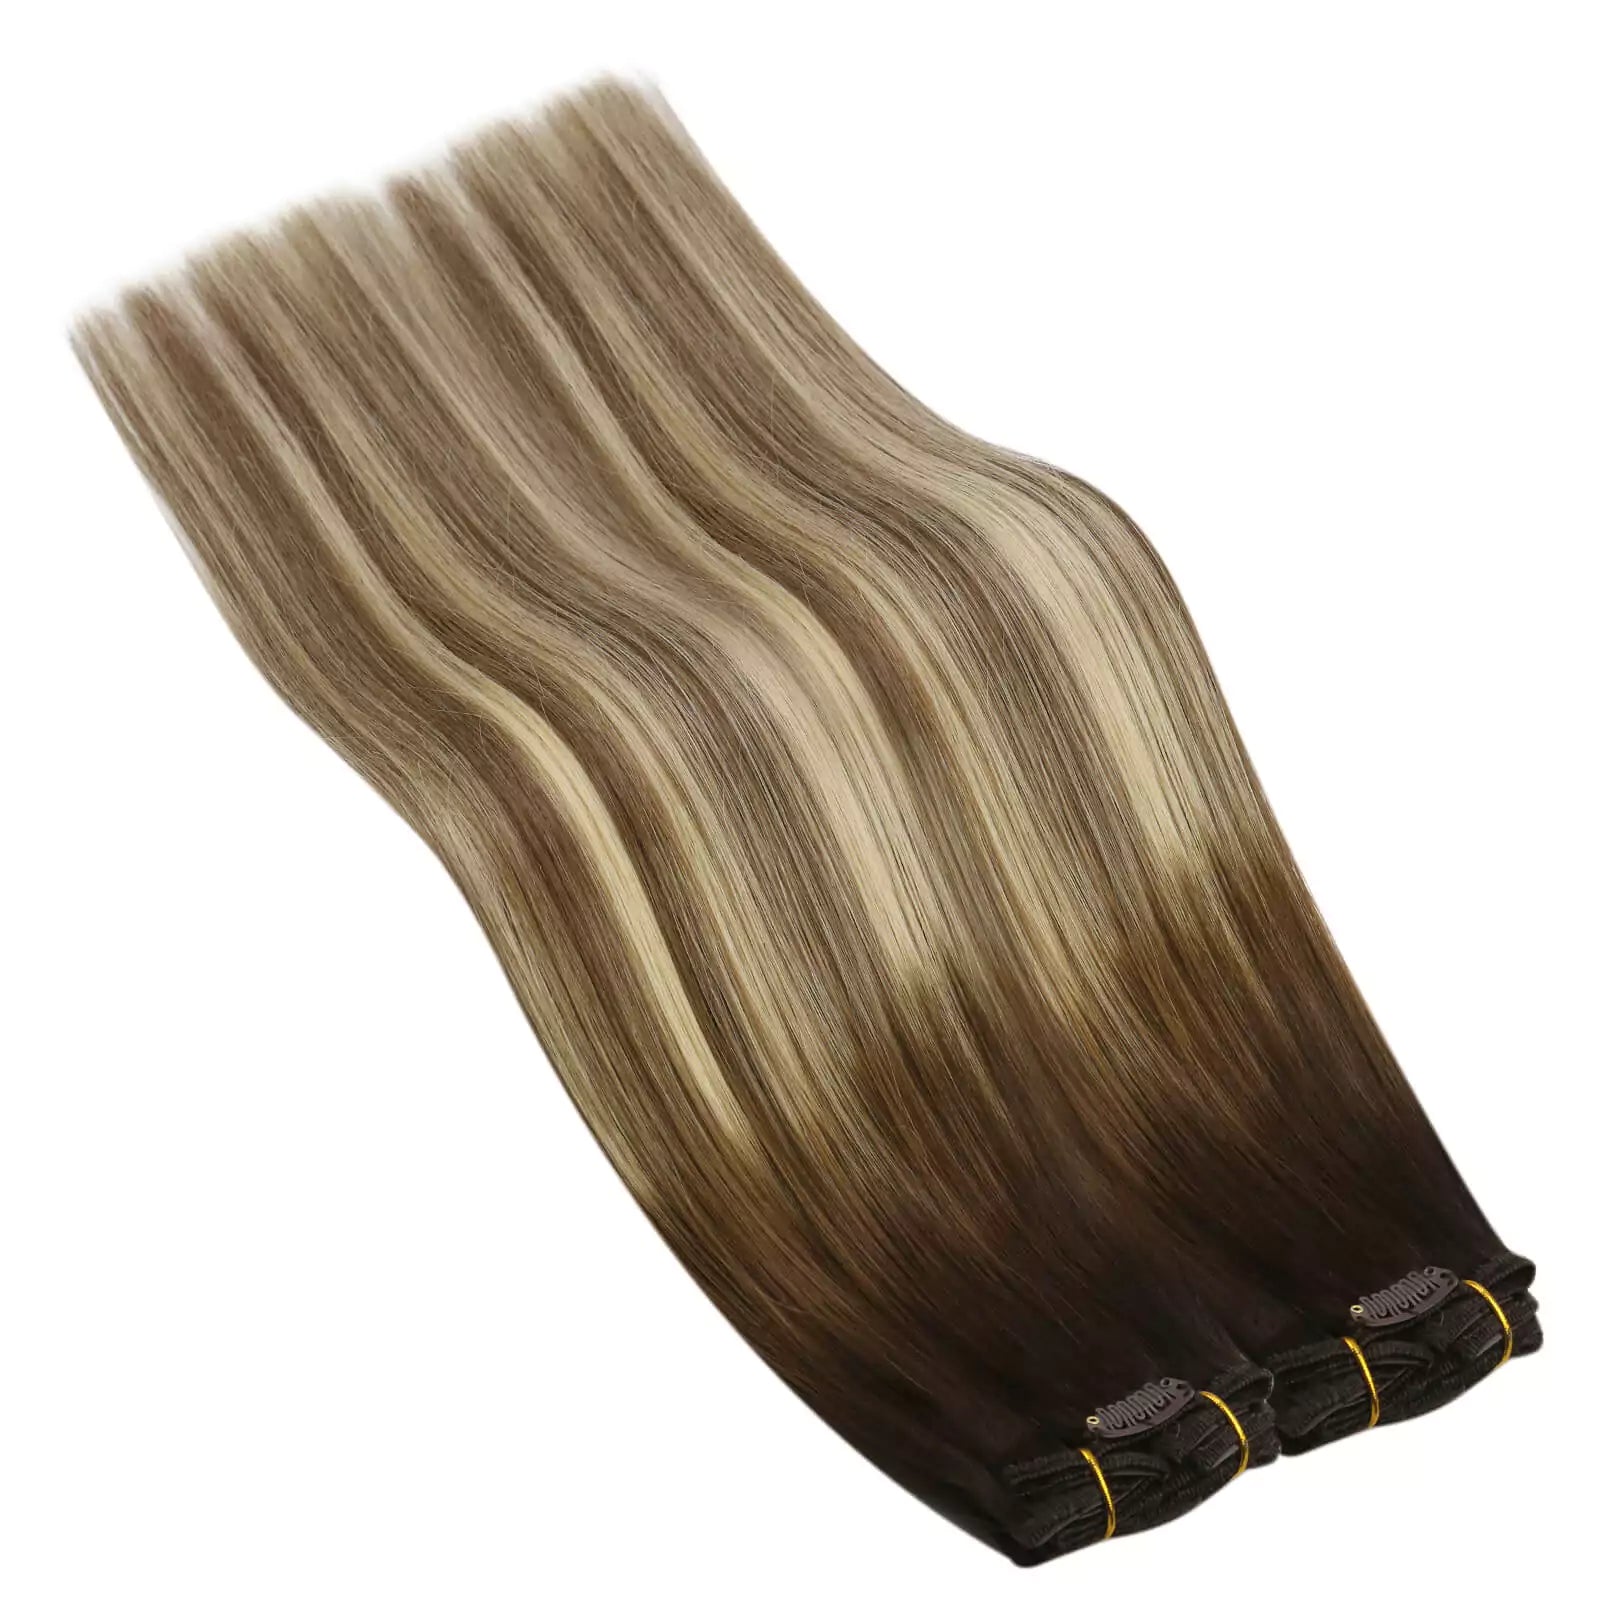 Balayage 4/6/613 Brown with Blonde 18 Inch Clip on Remy Hair Extension for Women